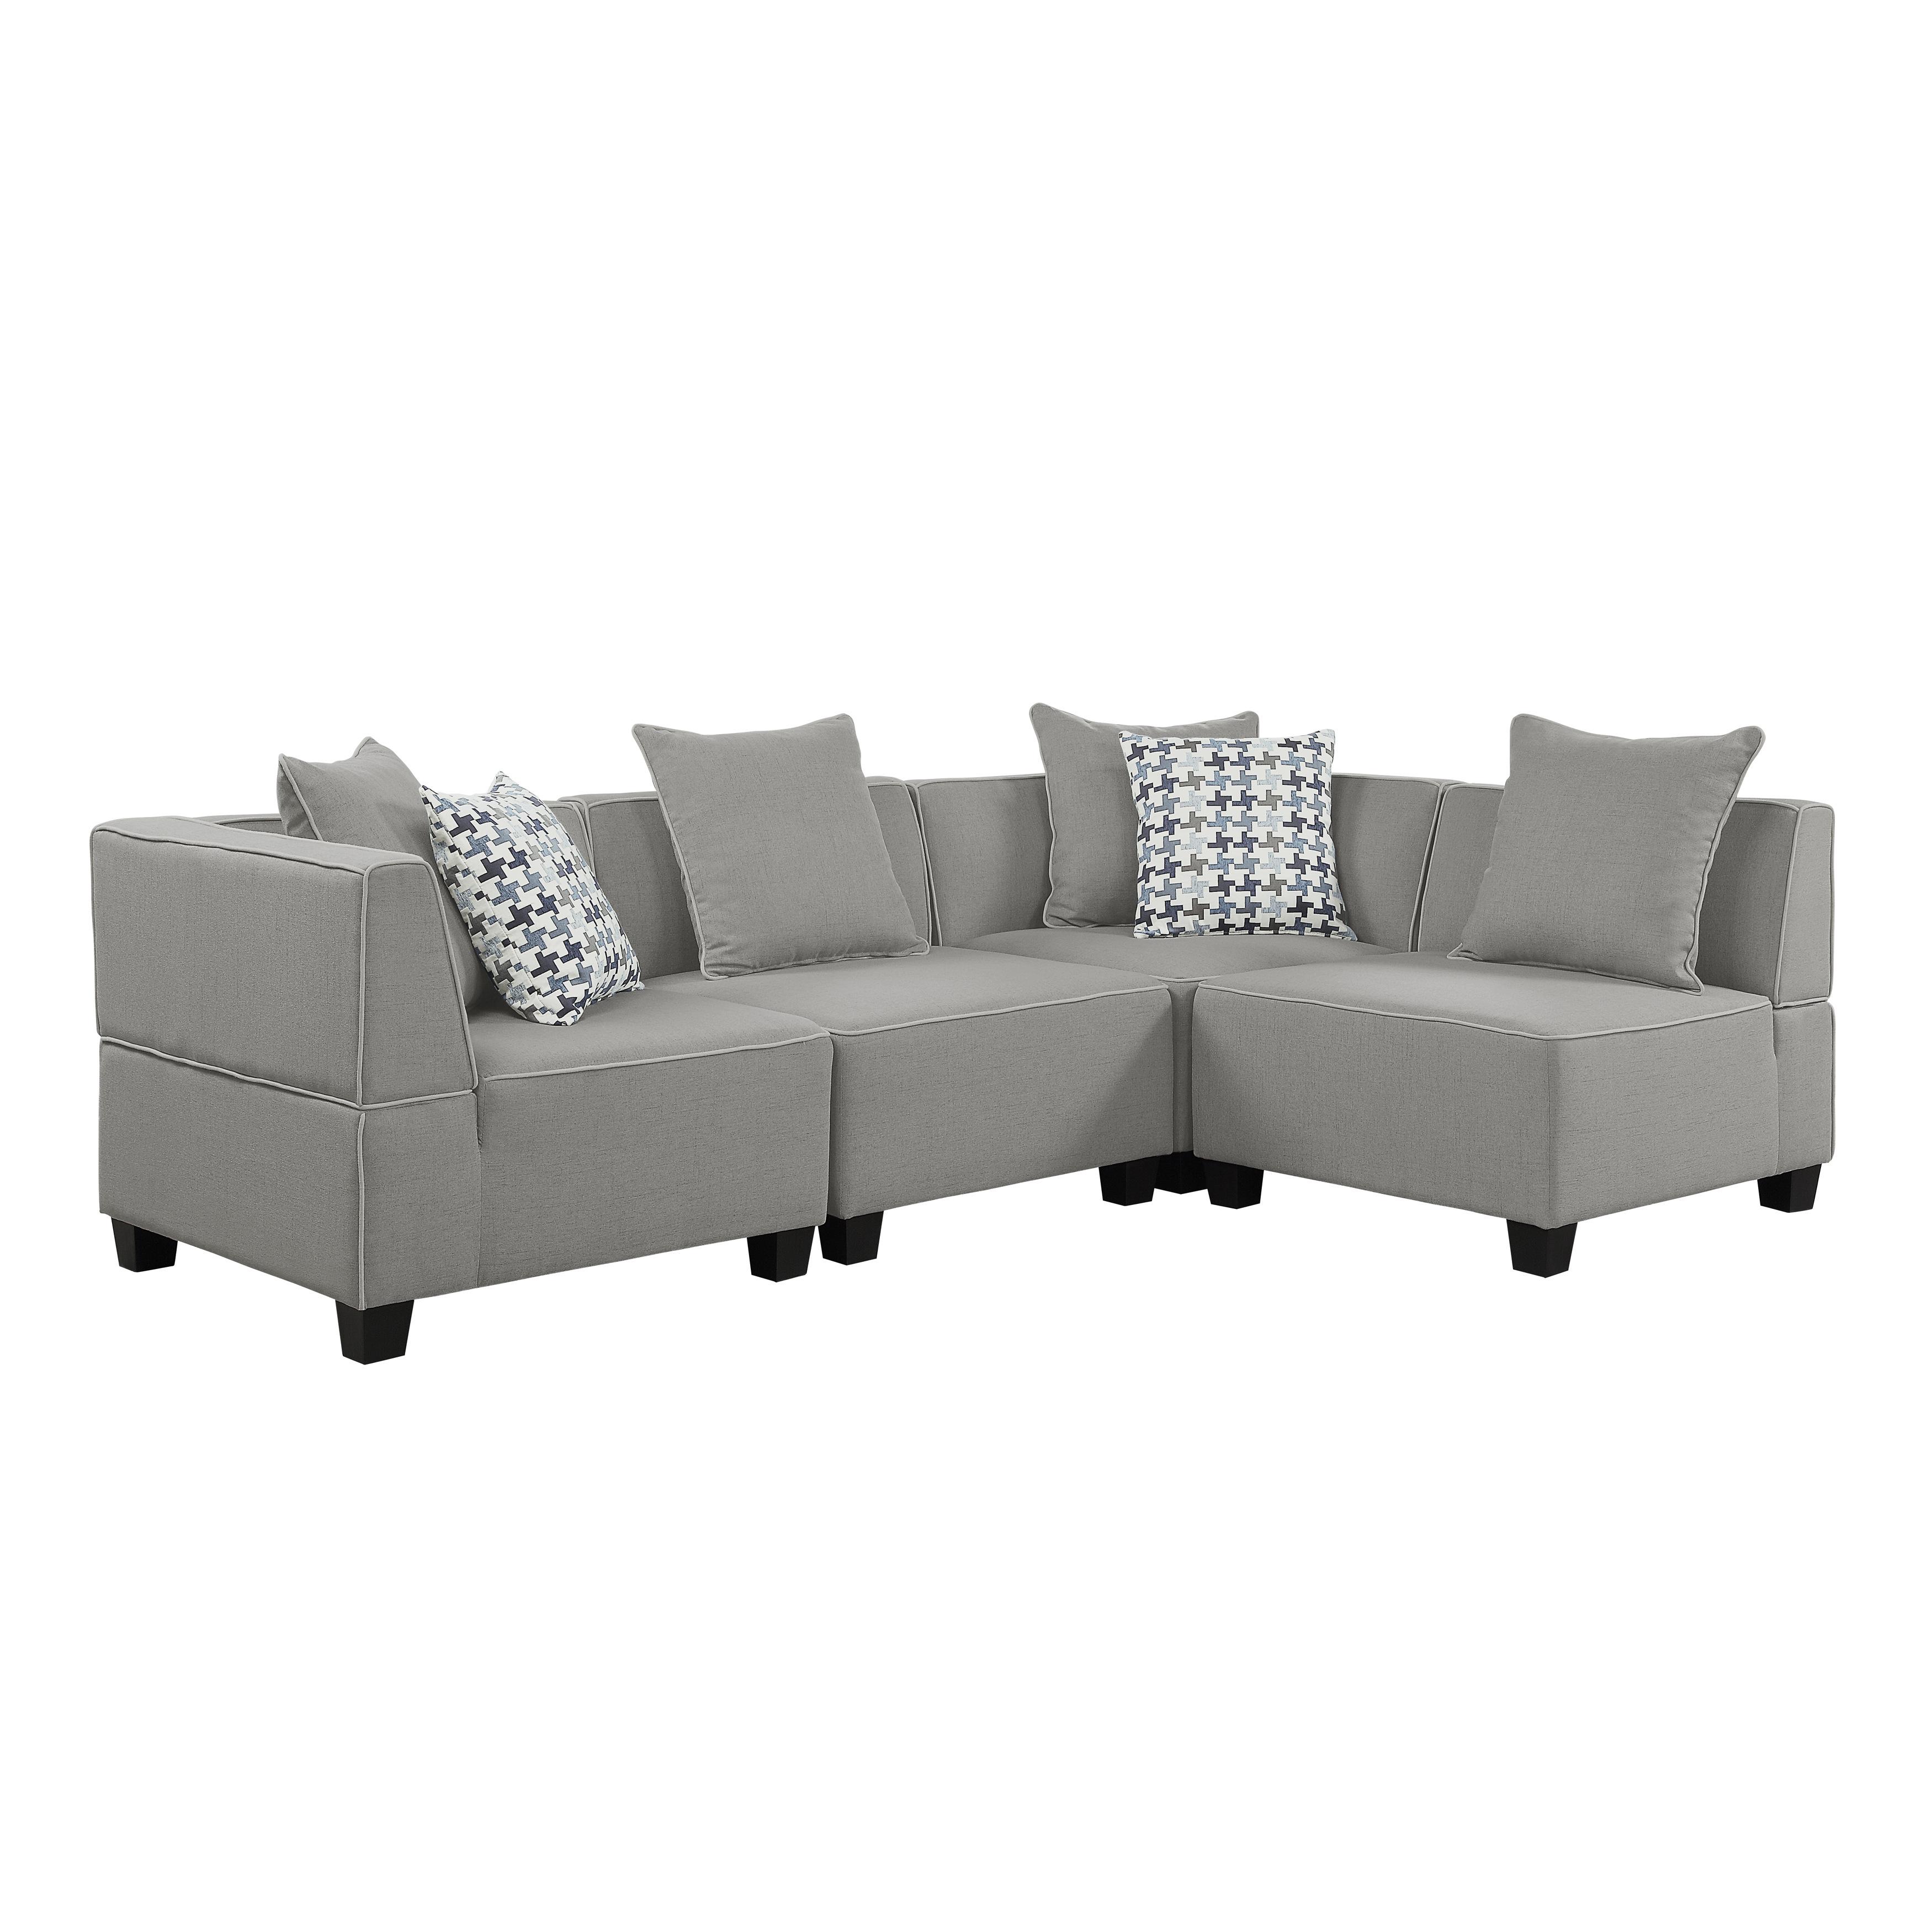 Modern Sectional 9357GY*4SC Jayne 9357GY*4SC in Gray 